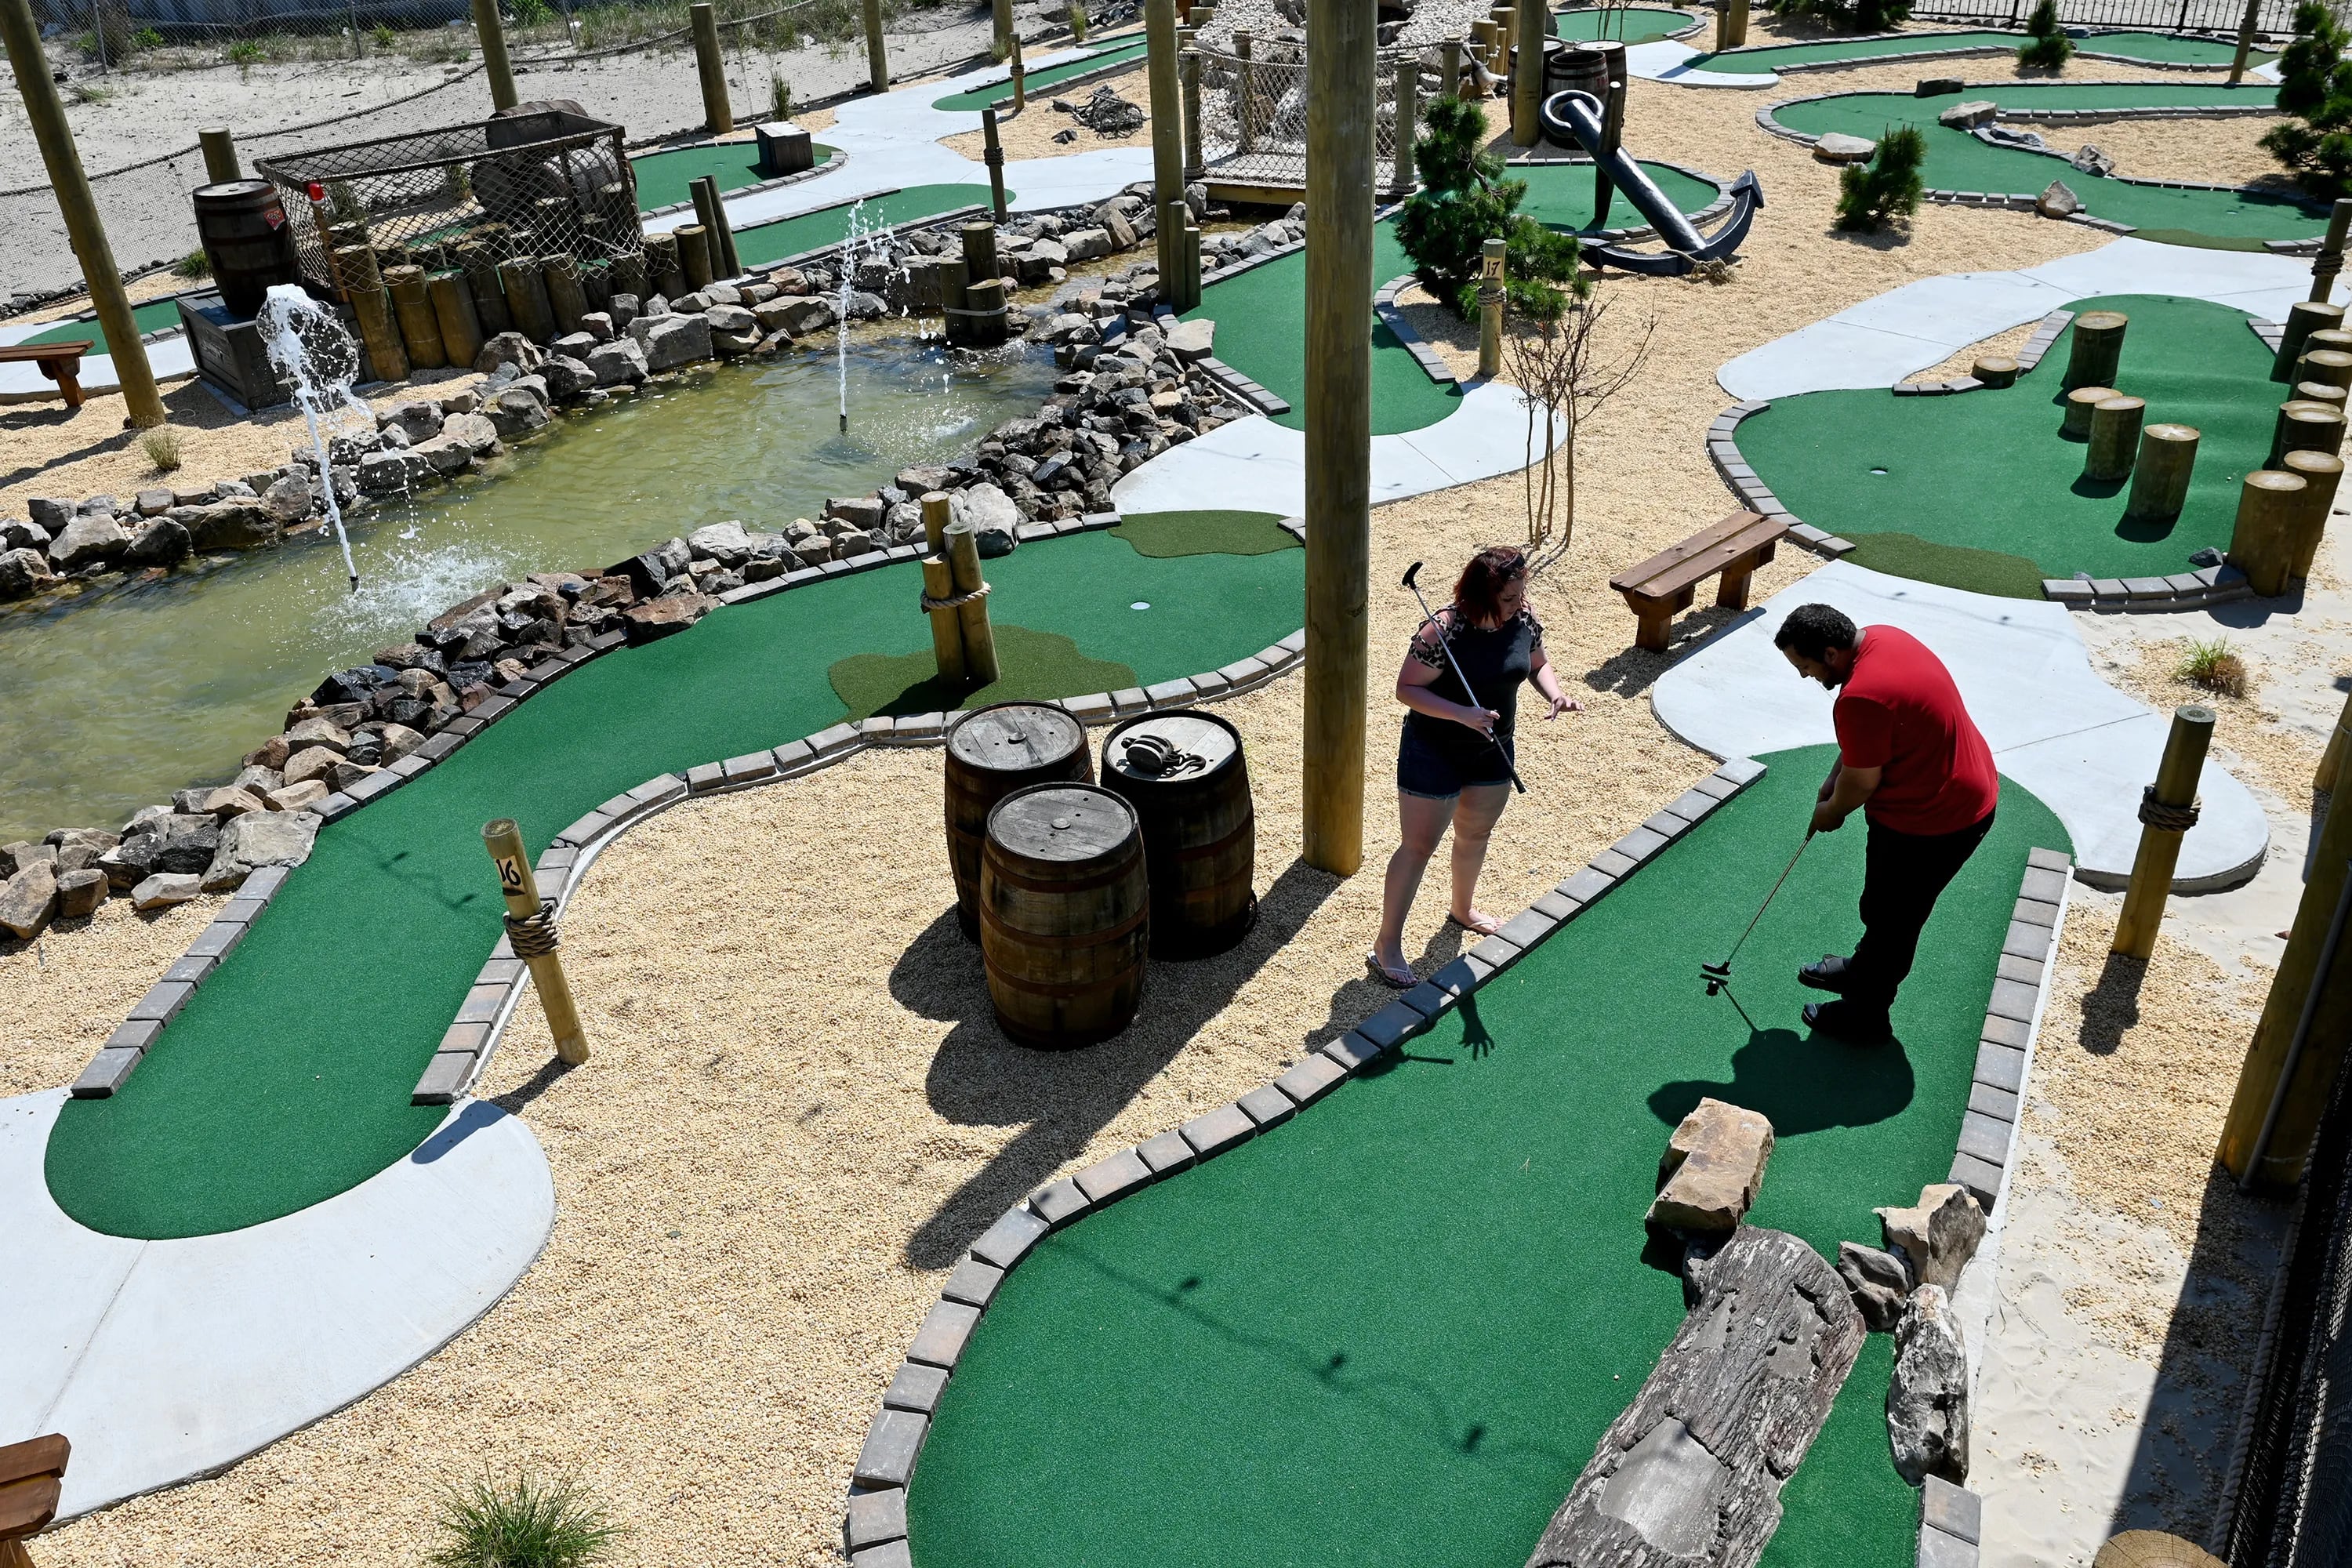 Catherine McCallister (left) of Little Egg Harbor and Jose Rivera (right) of Atlantic City play at North Beach Mini Golf in Atlantic City on May 22, 2022, one of the best mini golf spots at the Shore.